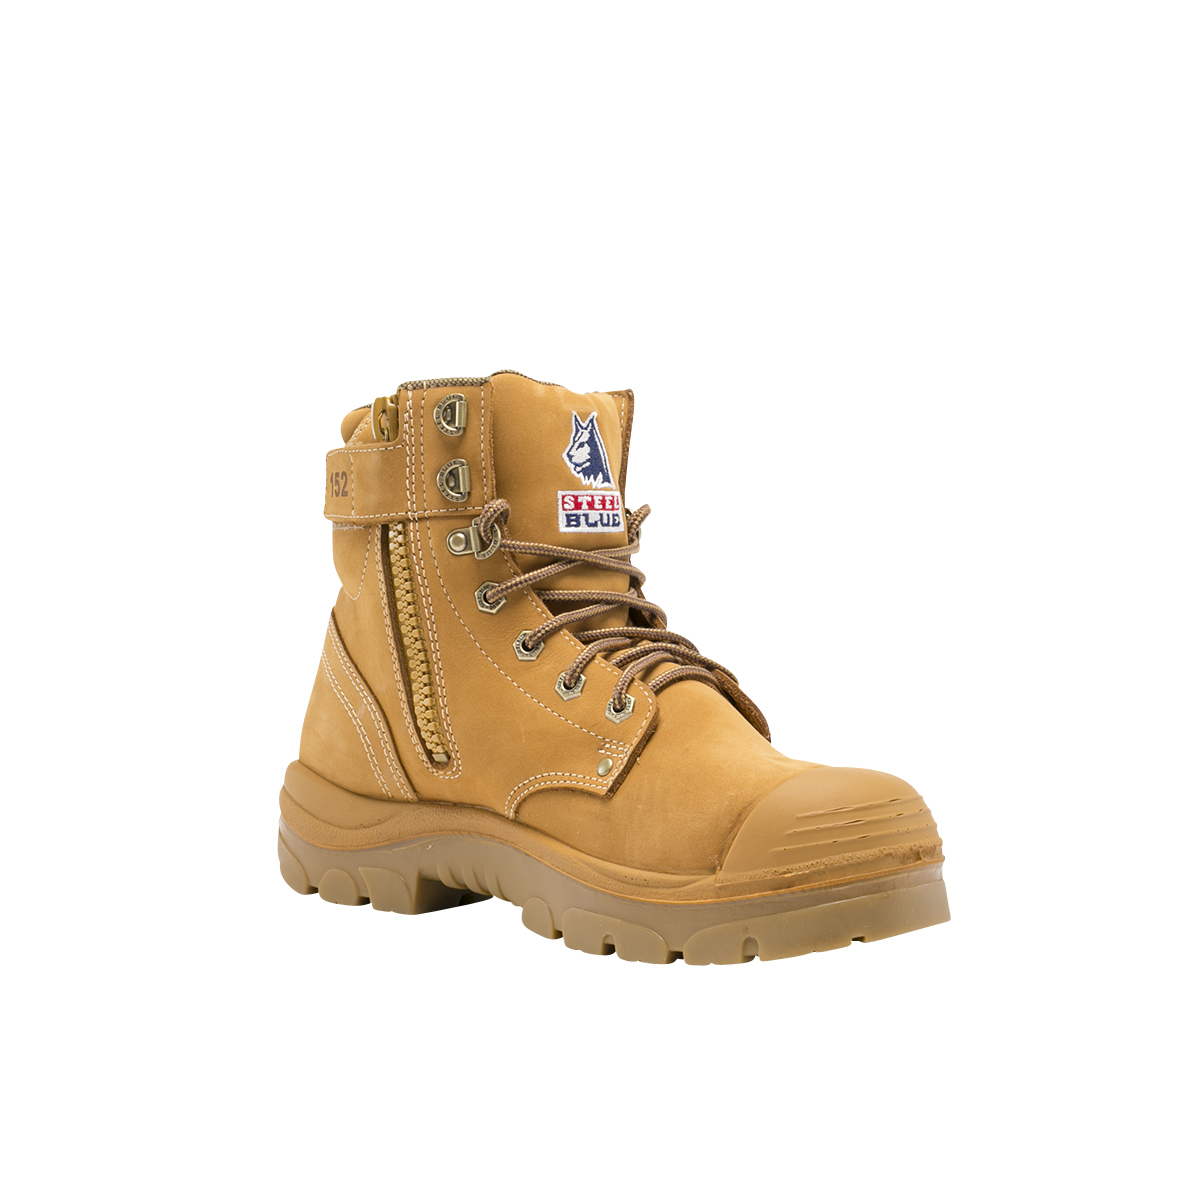 SAFETY BOOT ARGYLE ZIP BC PR 10 -ANKLE ZIP LACE UP WHEAT NITRILE